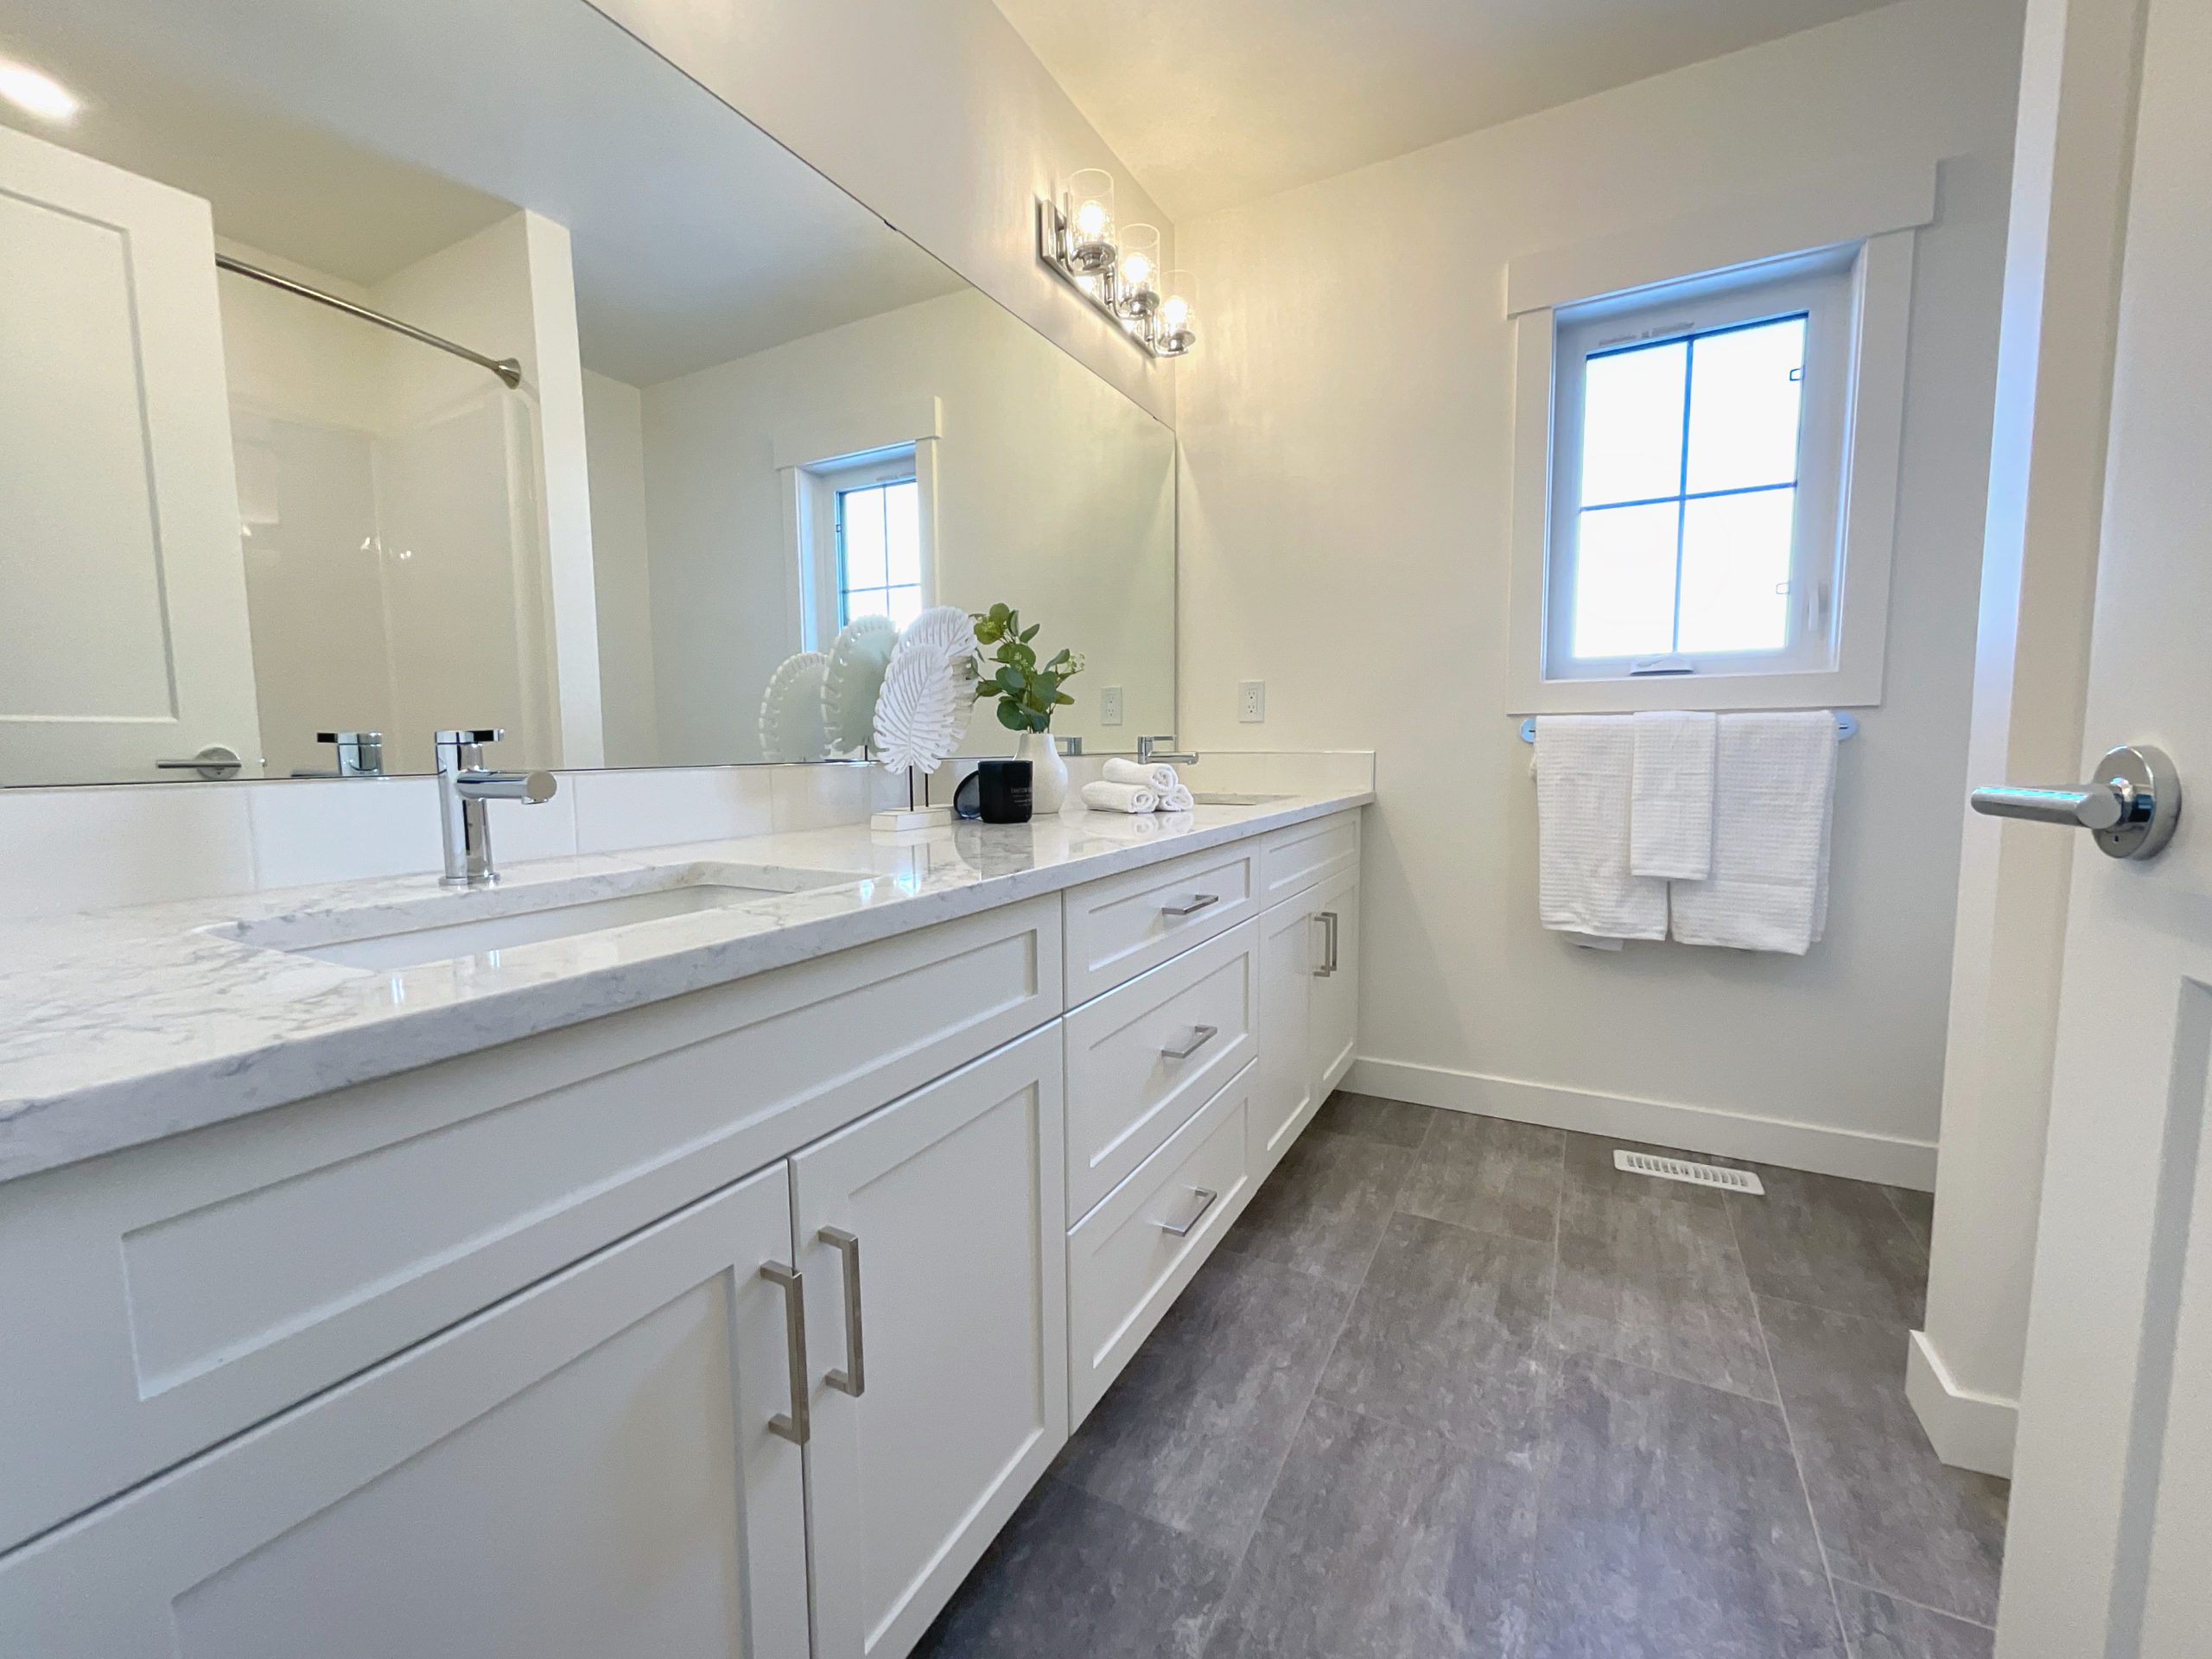 A white family bathroom with a large mirror and double sinks.